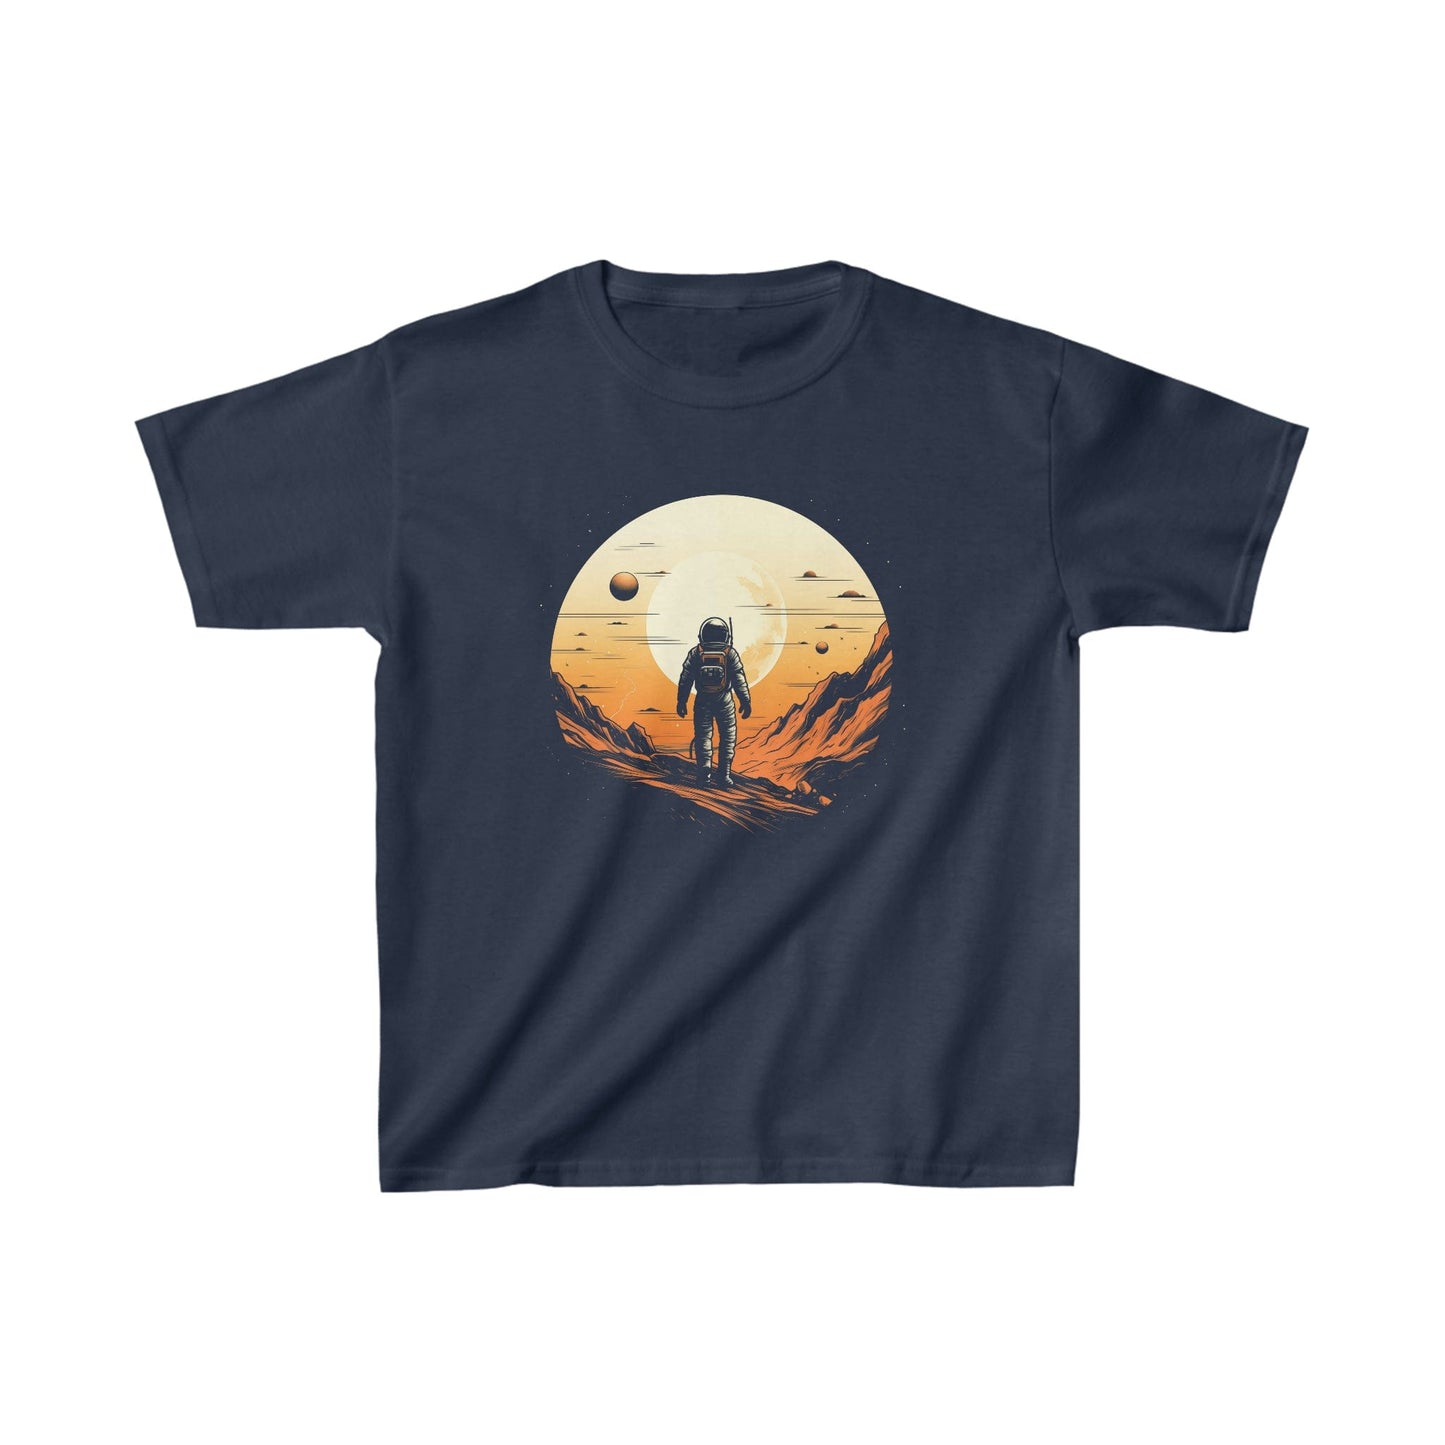 Kids clothes XS / Navy Youth Lunar Explorer: Astronaut on the Moon T-Shirt